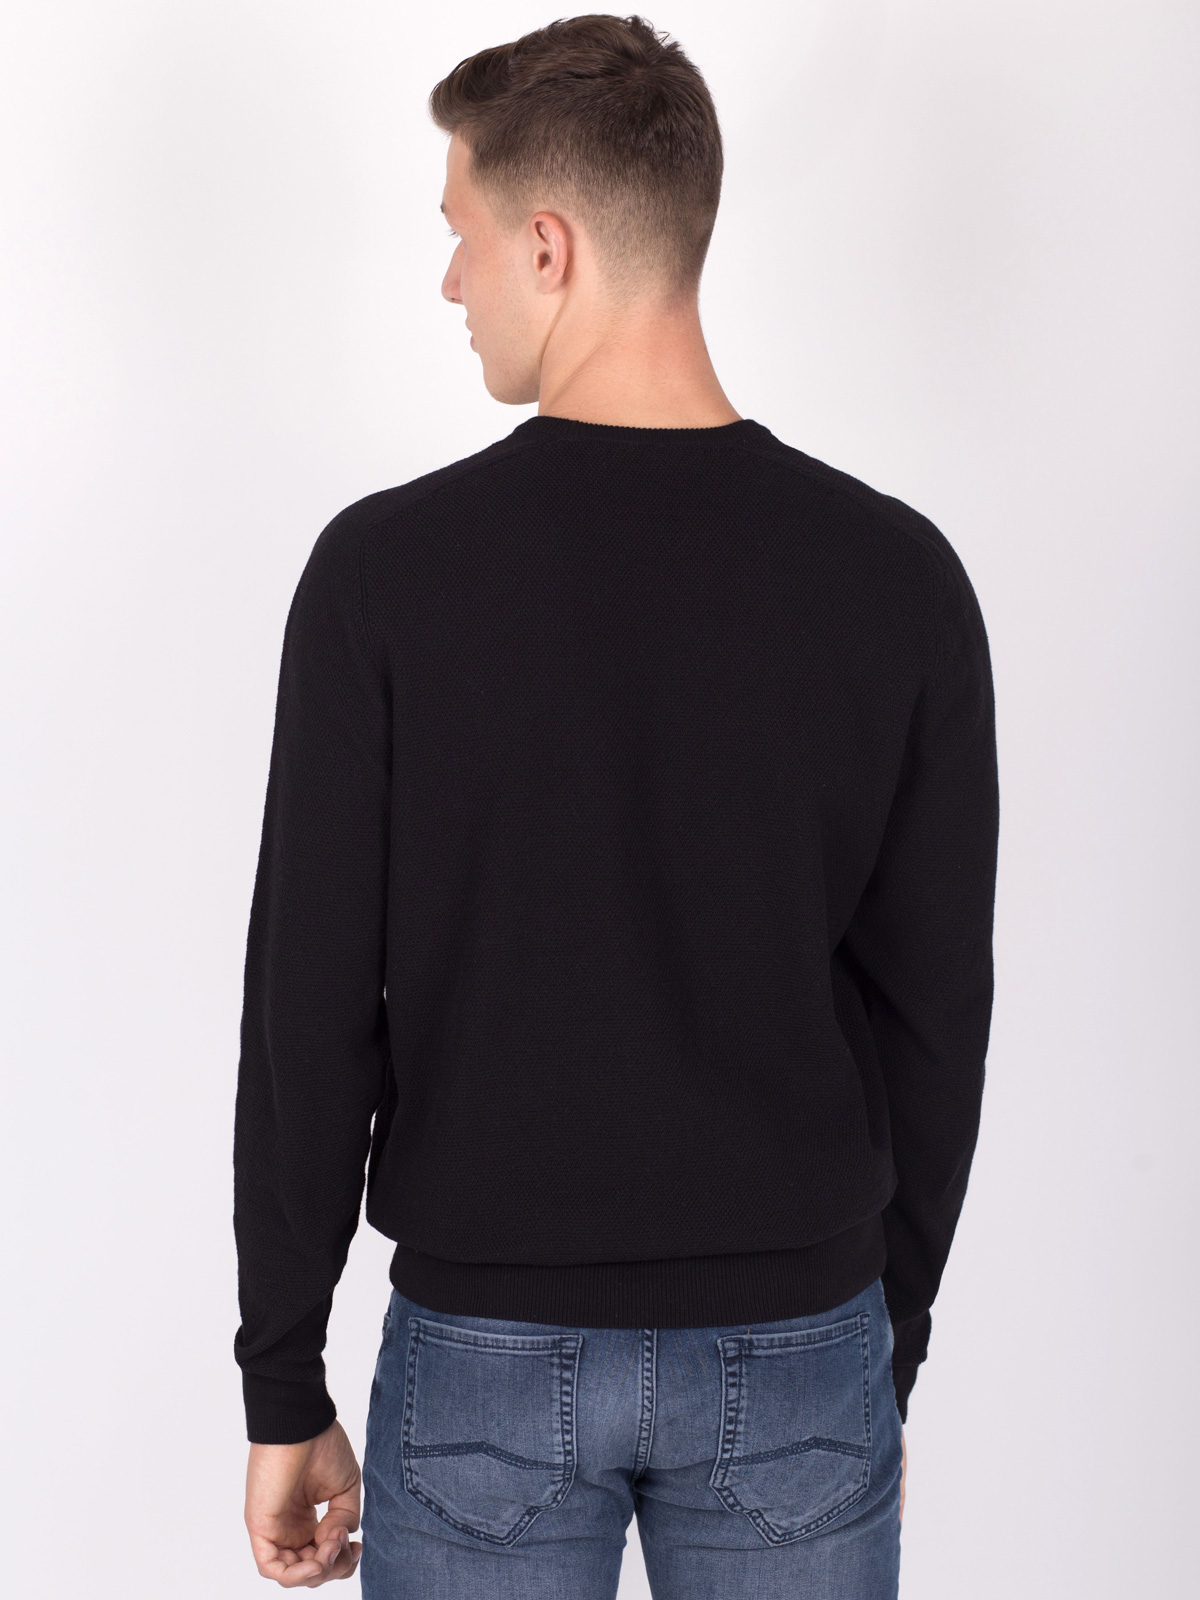 Cotton sweater in black - 35285 € 16.31 img4